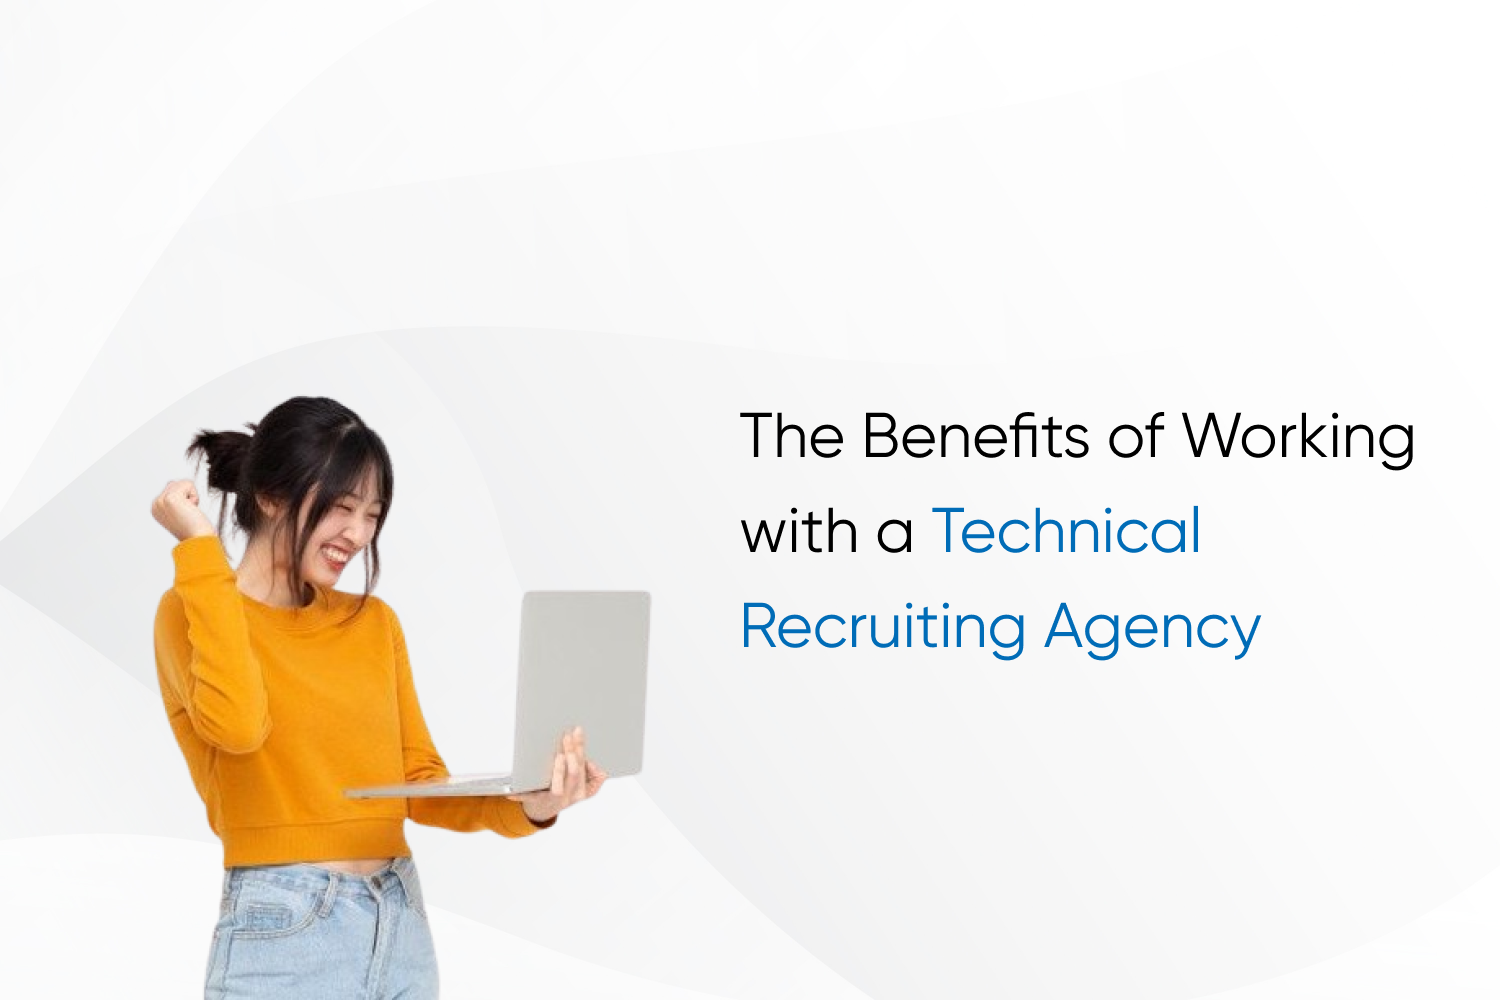 The Benefits of Working with a Technical Recruiting Agency